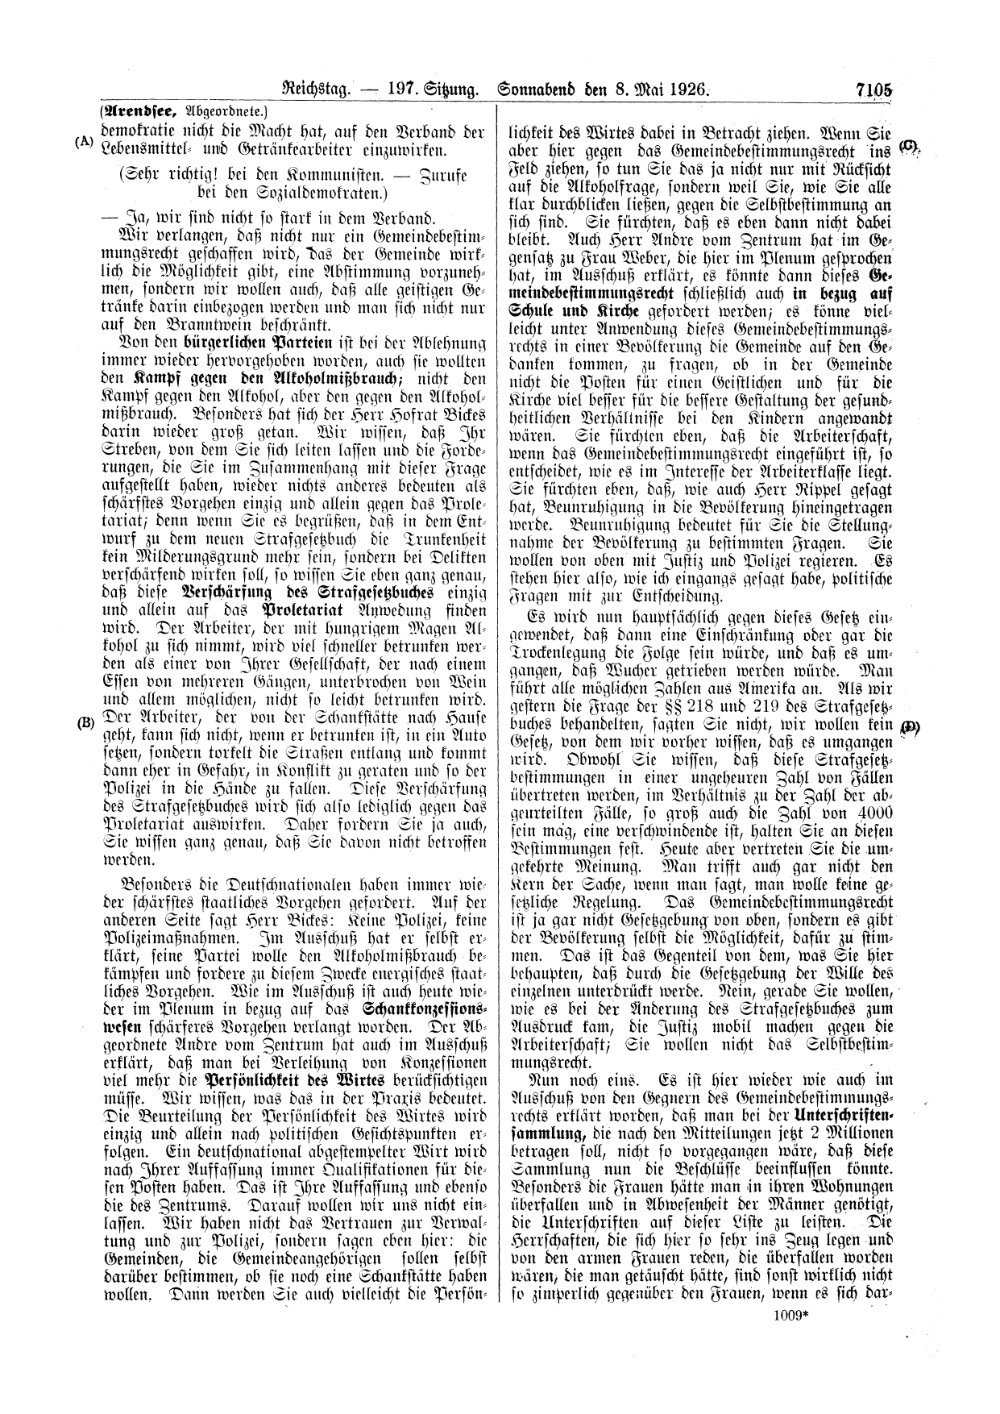 Scan of page 7105